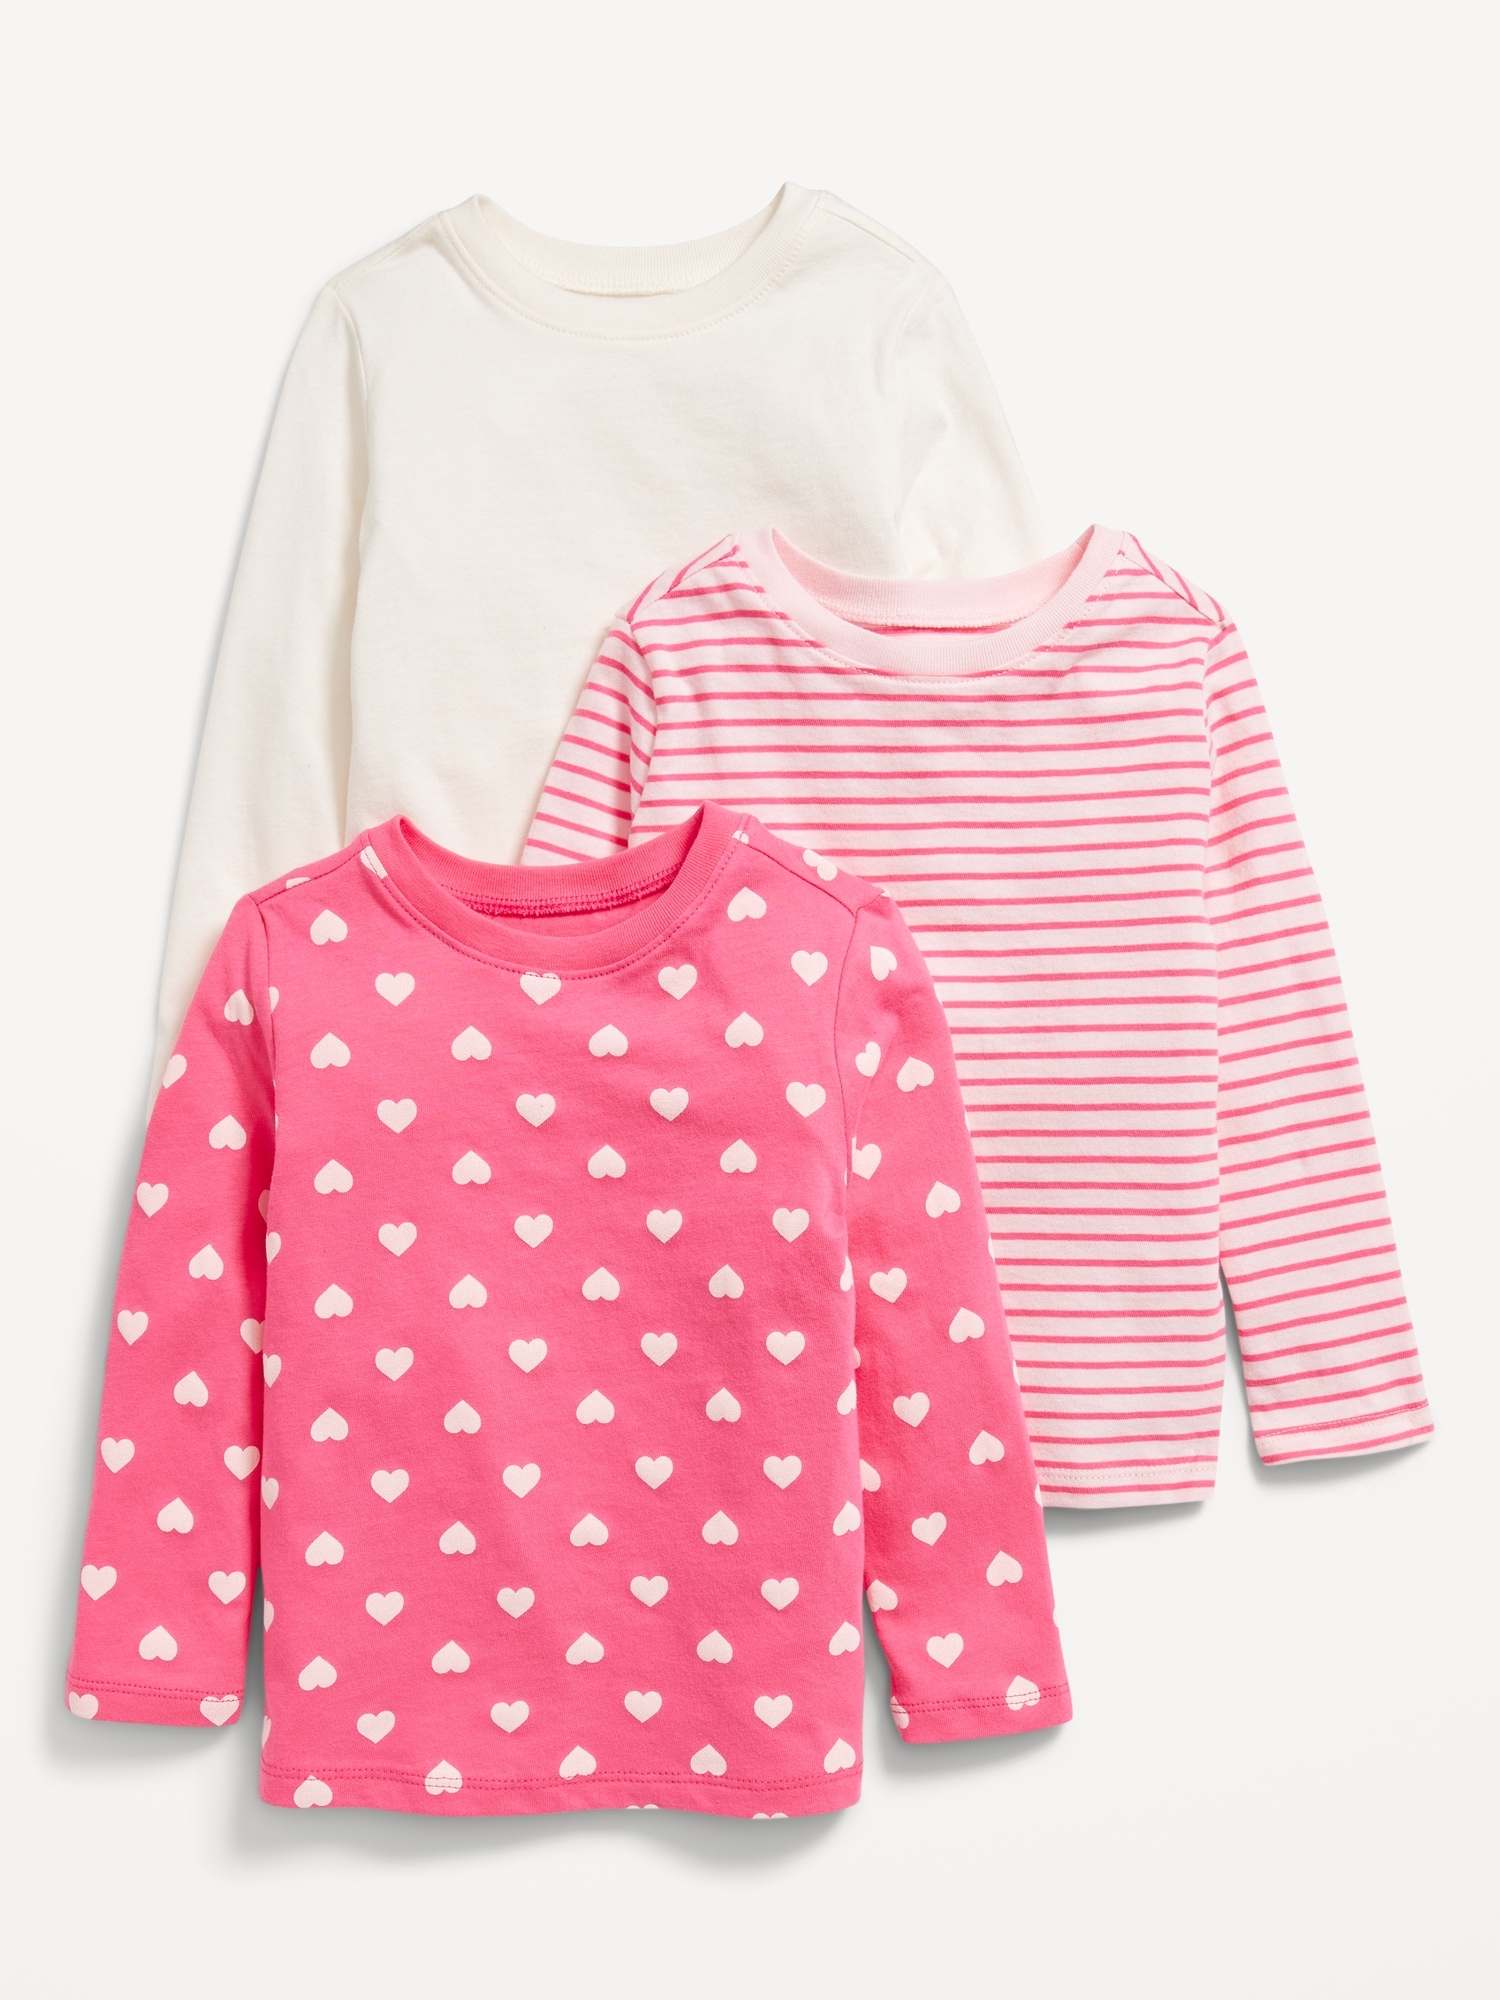 Long-Sleeve Graphic T-Shirt 3-Pack for Toddler Girls